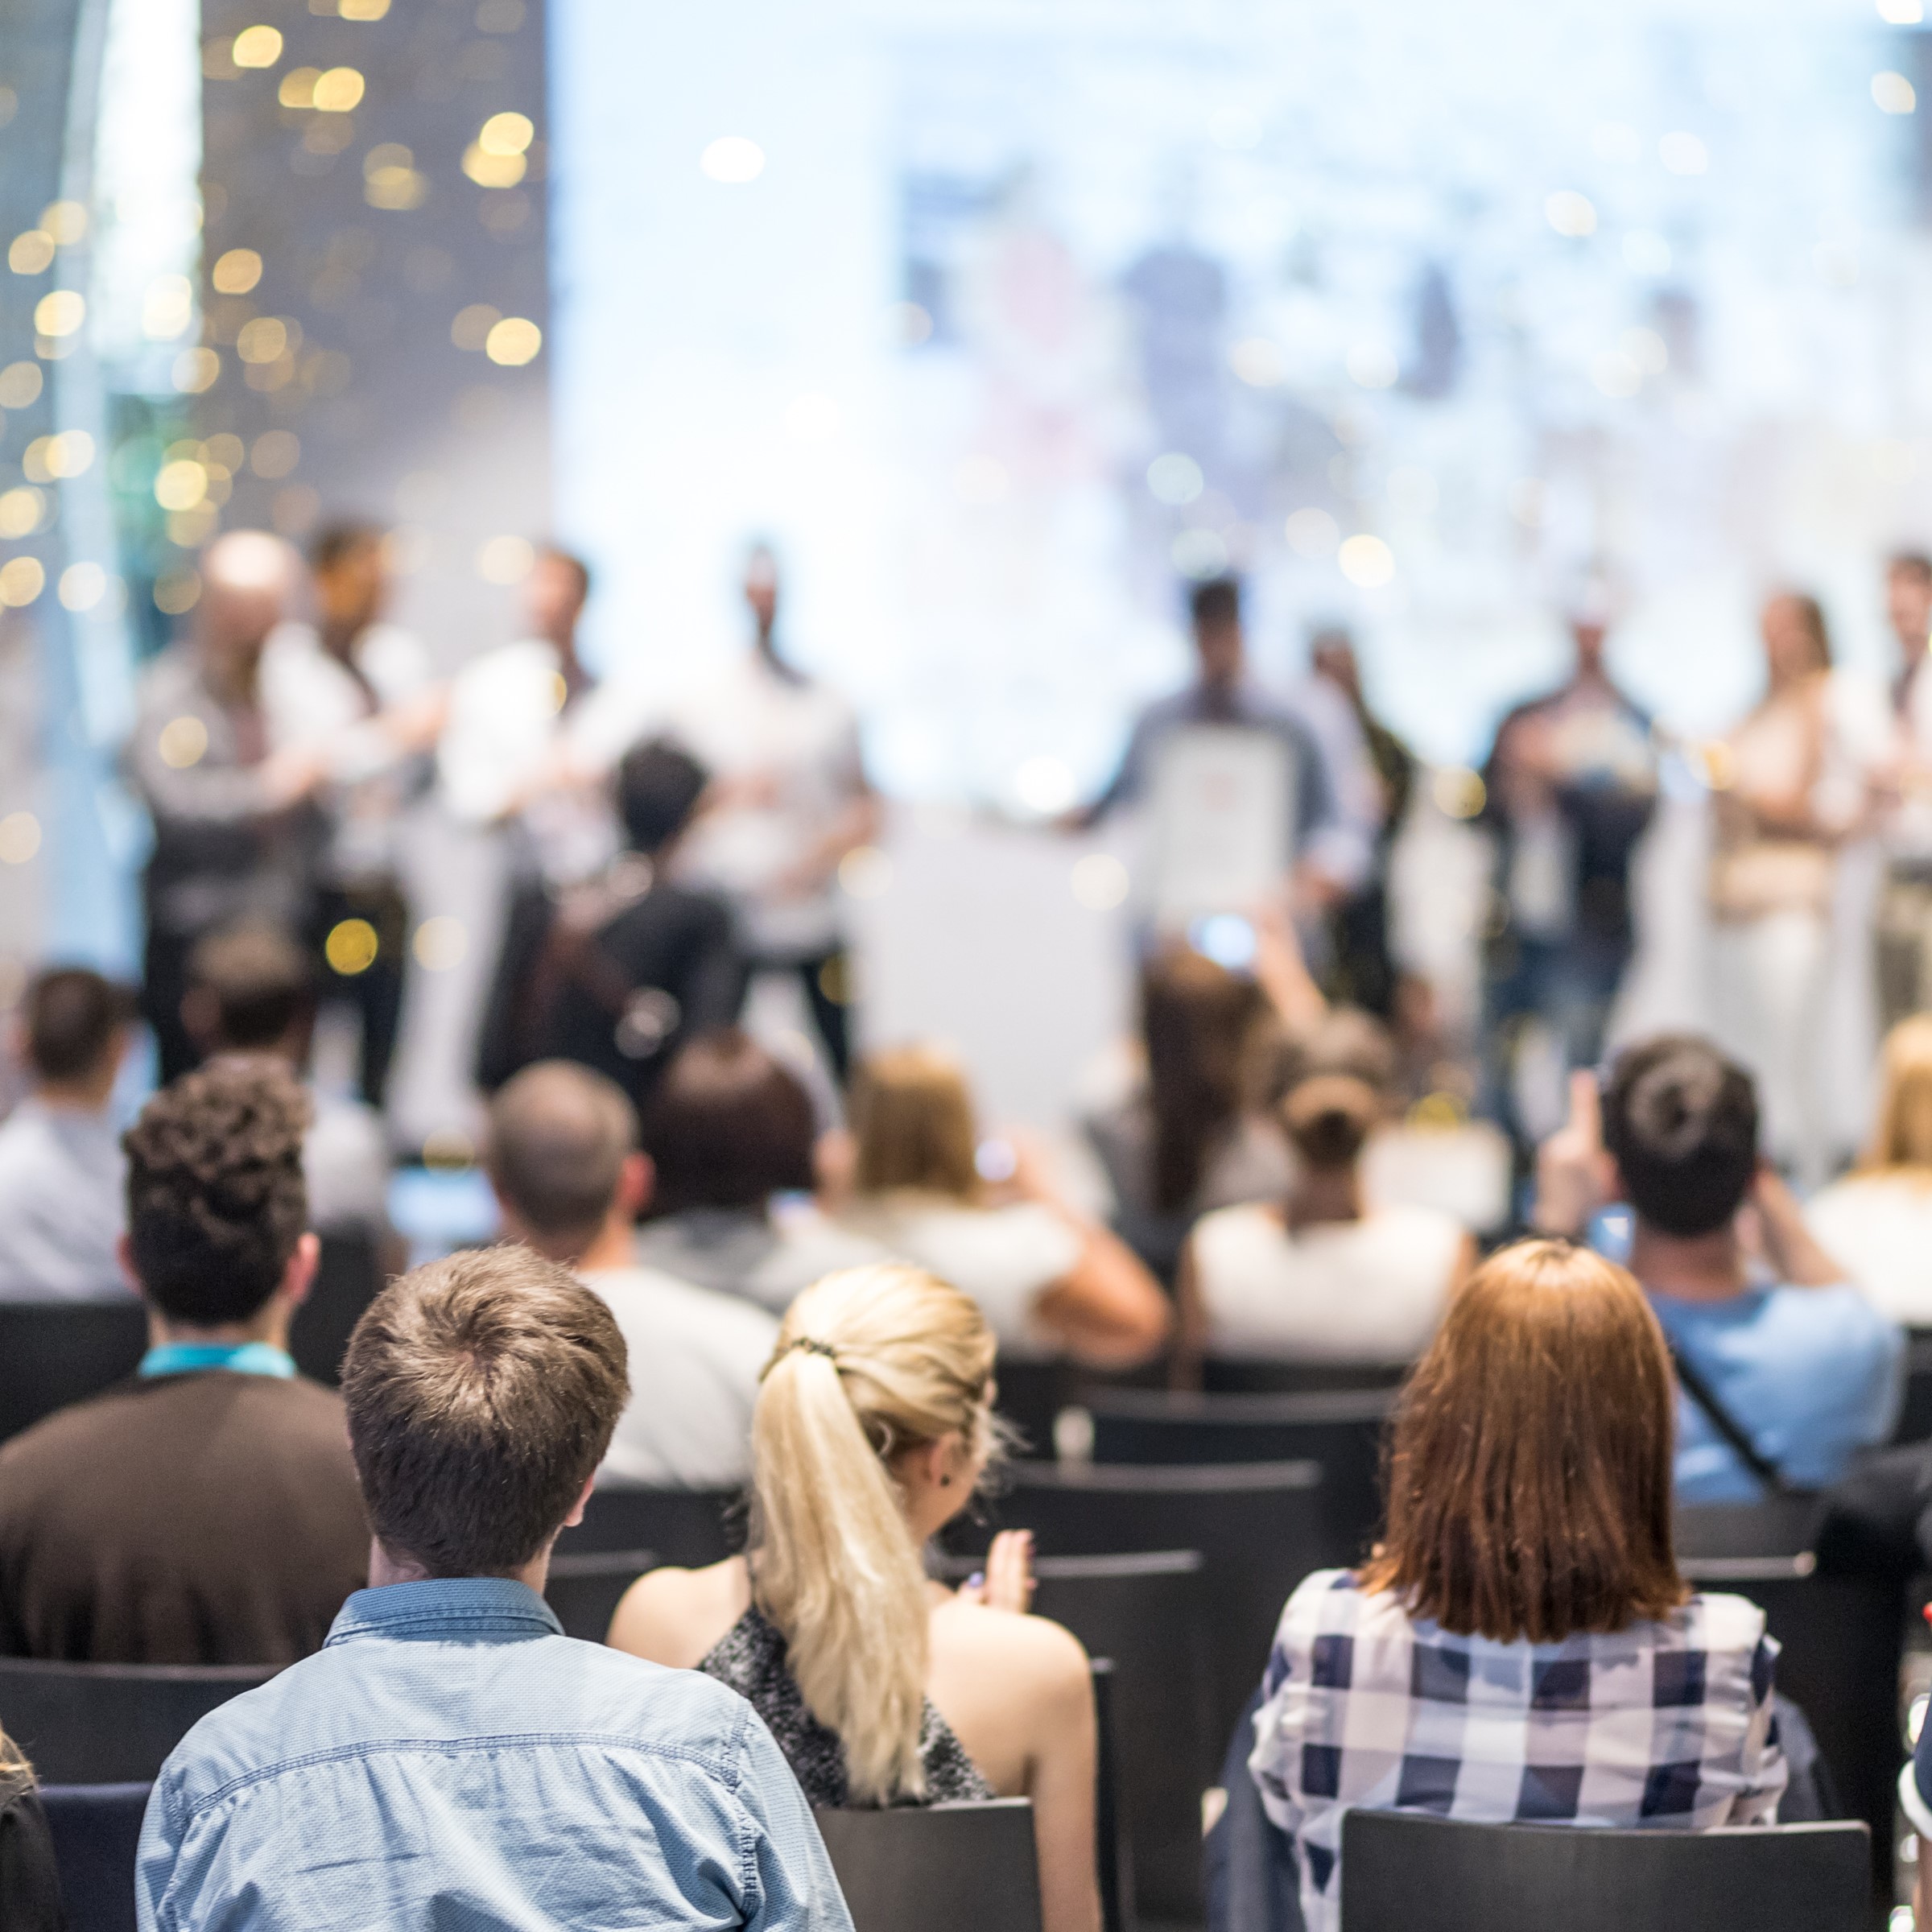 Stock image of audience looking at people on a stage